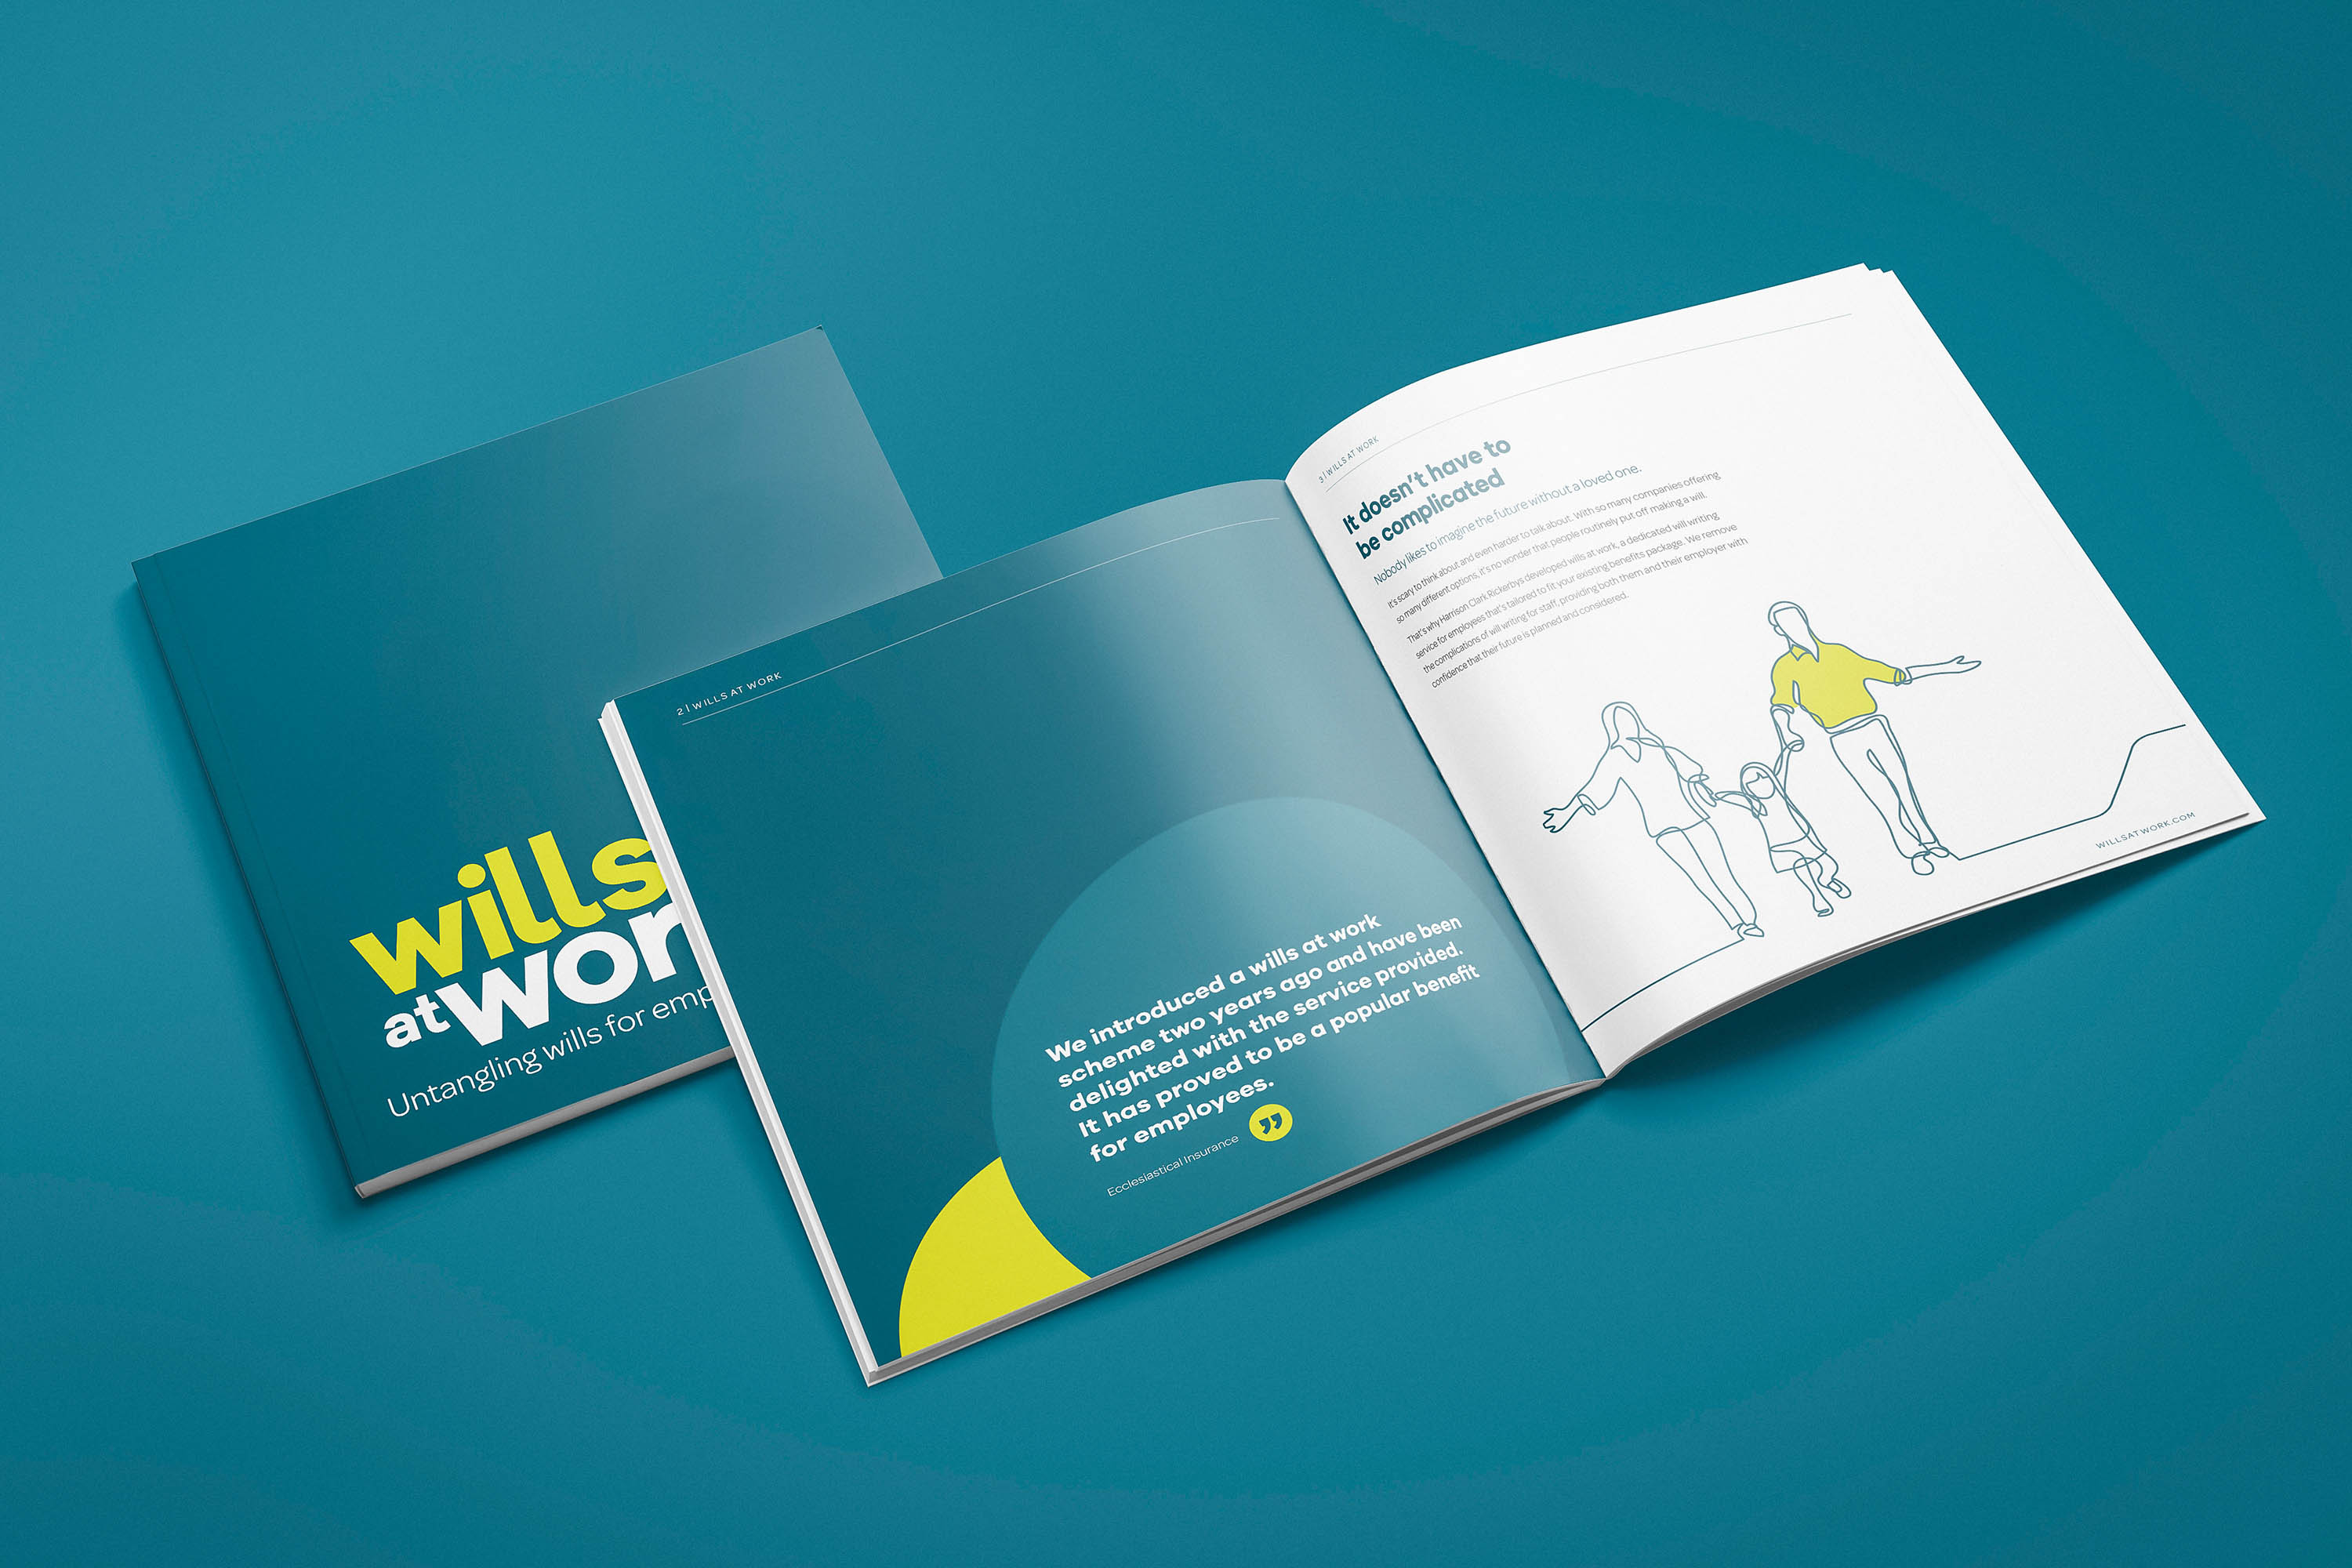 Brochure design for Harrison Clark Rickerbys' Wills at Work by Mighty, branding agency Worcester